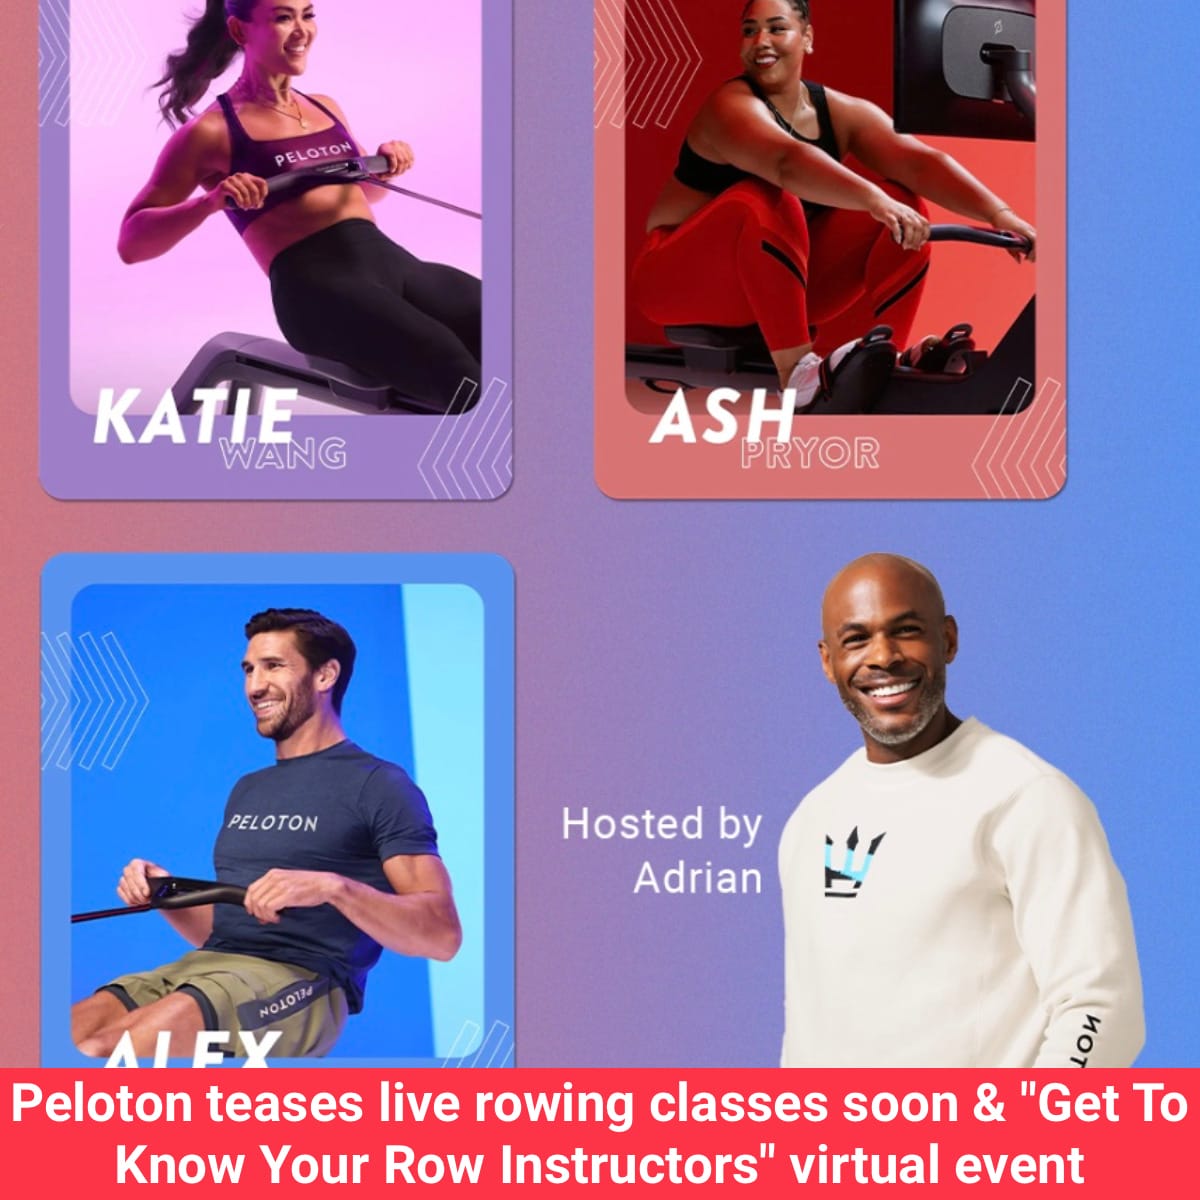 Peloton teases live rowing classes soon and